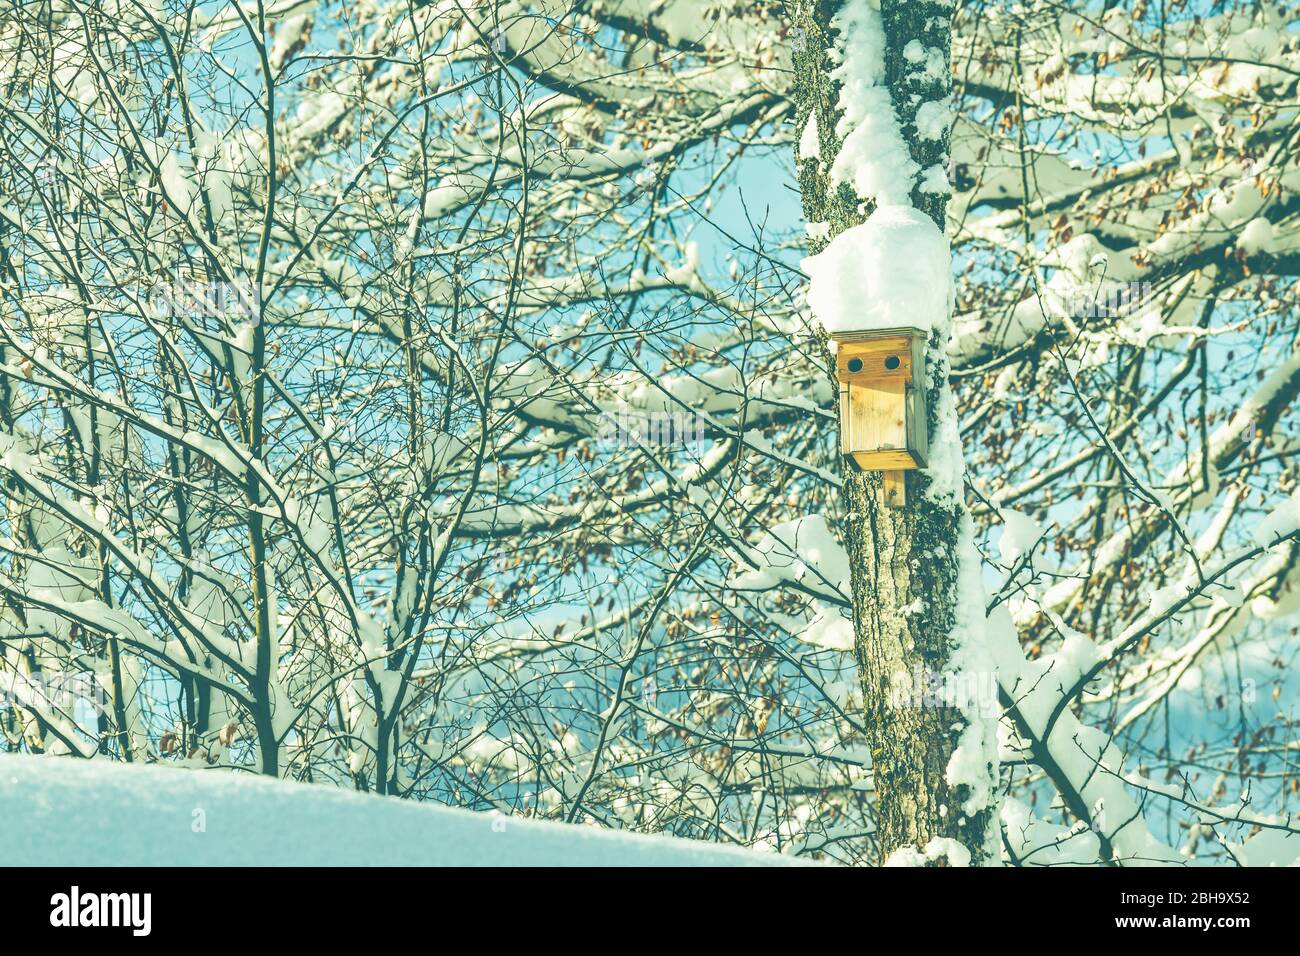 A birdhouse, star box at a tree in winter. Stock Photo